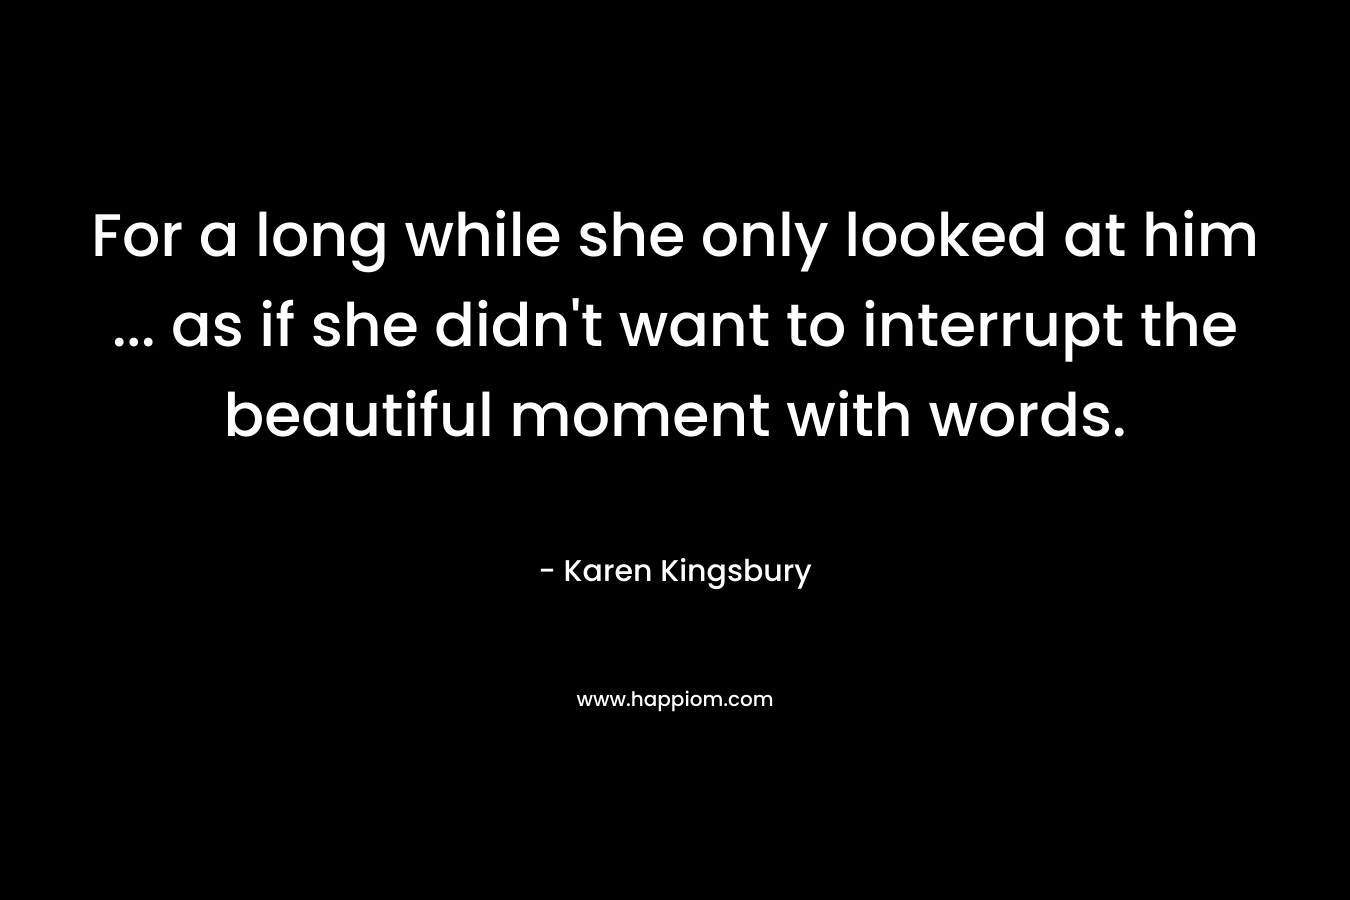 For a long while she only looked at him ... as if she didn't want to interrupt the beautiful moment with words.